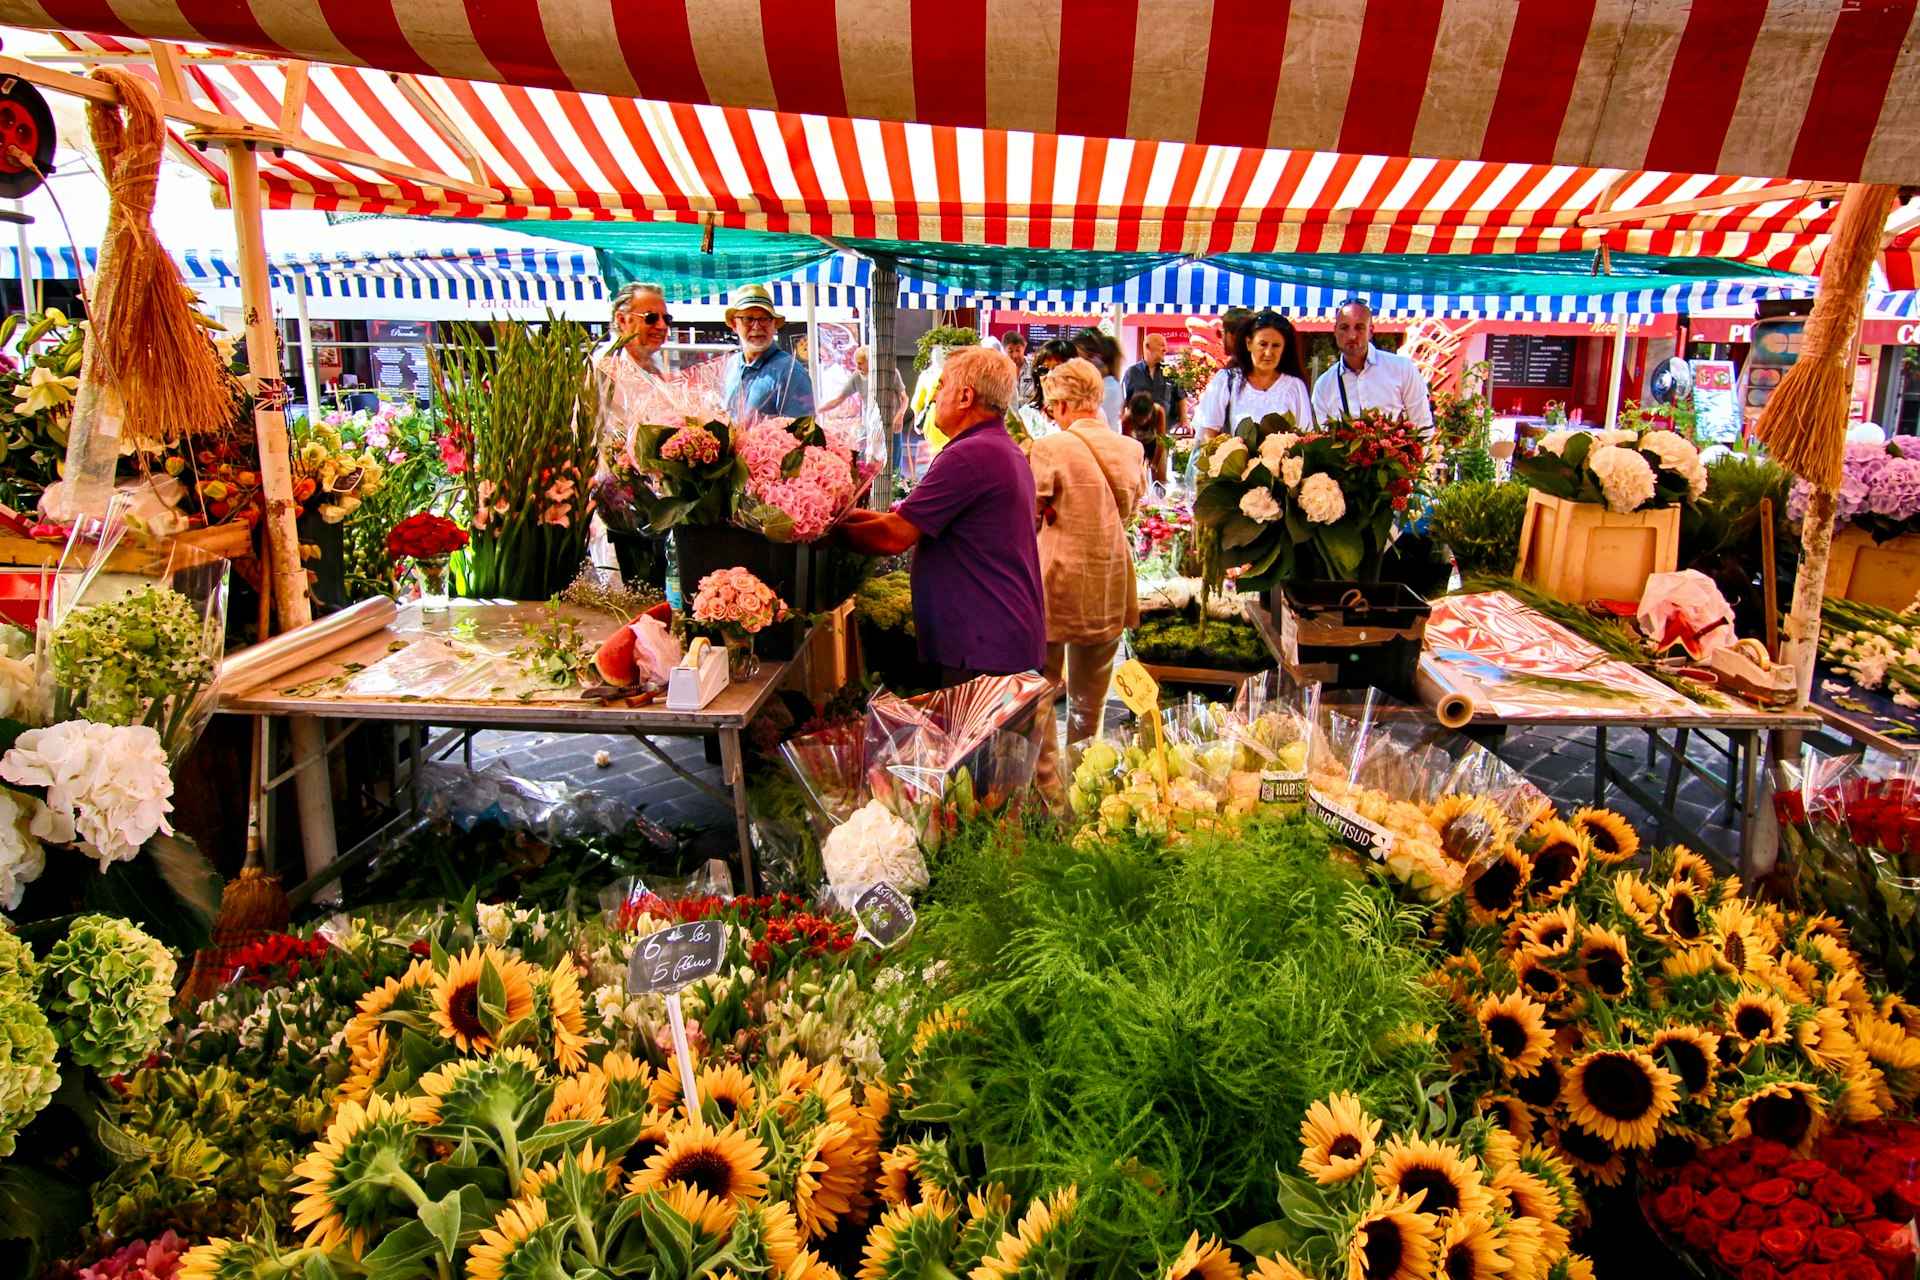 Flowers on display at the Marché aux Fleurs Cours Saleya, a popular market the OId Town of Nice, Côte d’Azur, France